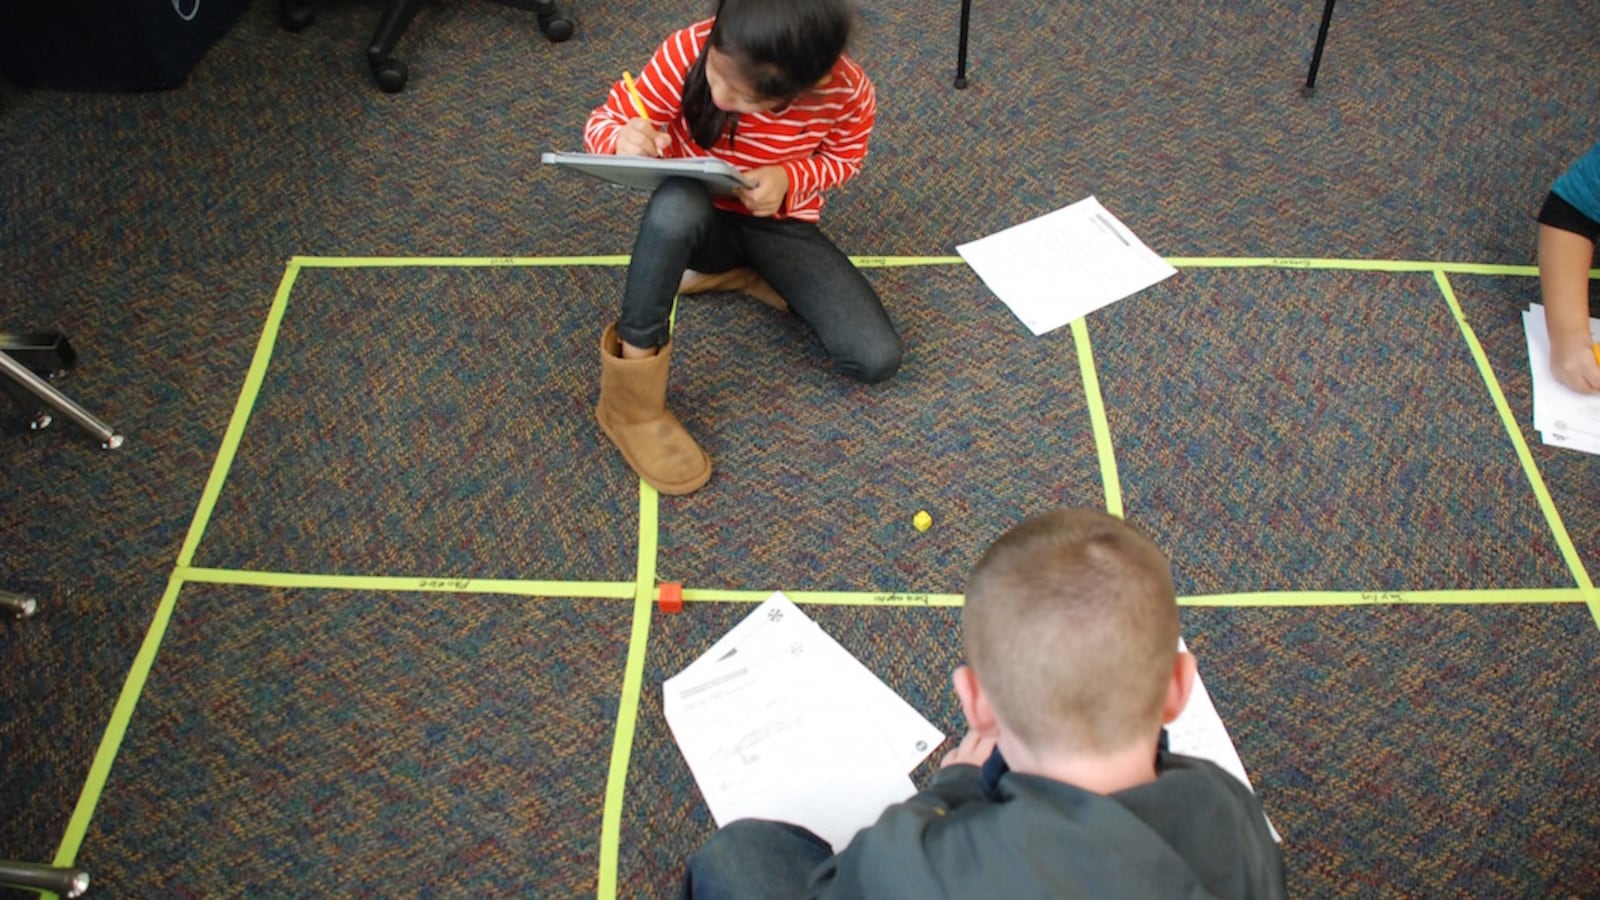 Students at Vista PEAK Exploratory in Aurora work on a math assignment. (Photo by Nic Garcia)